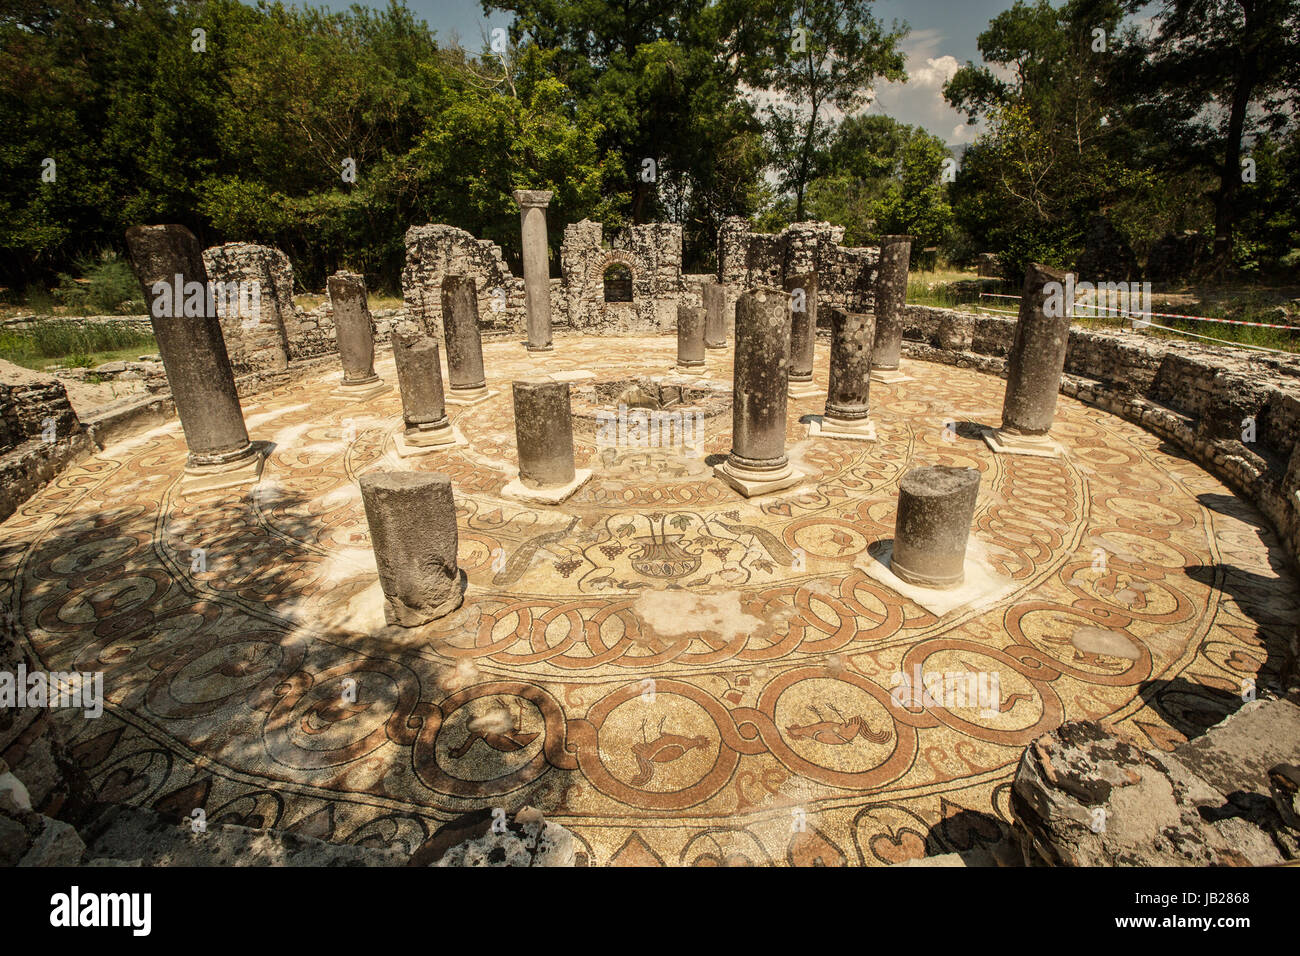 Famous Roman settlement located in archaeological city of Butrint in Albania Stock Photo